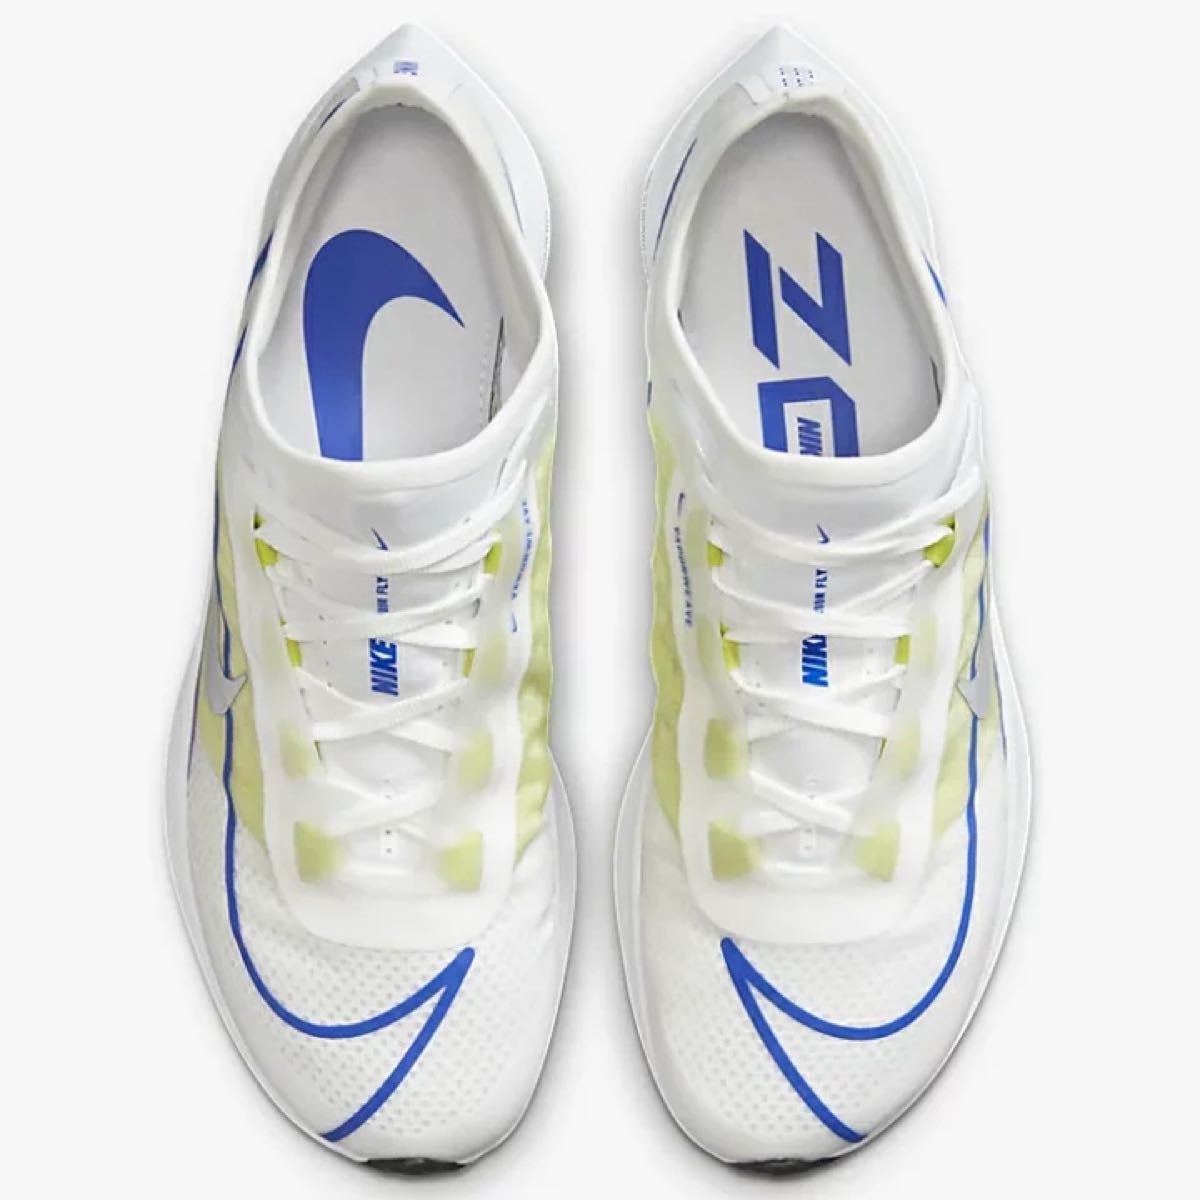 NIKE WMNS ZOOM FLY 3 ナイキ ズーム フライ 3